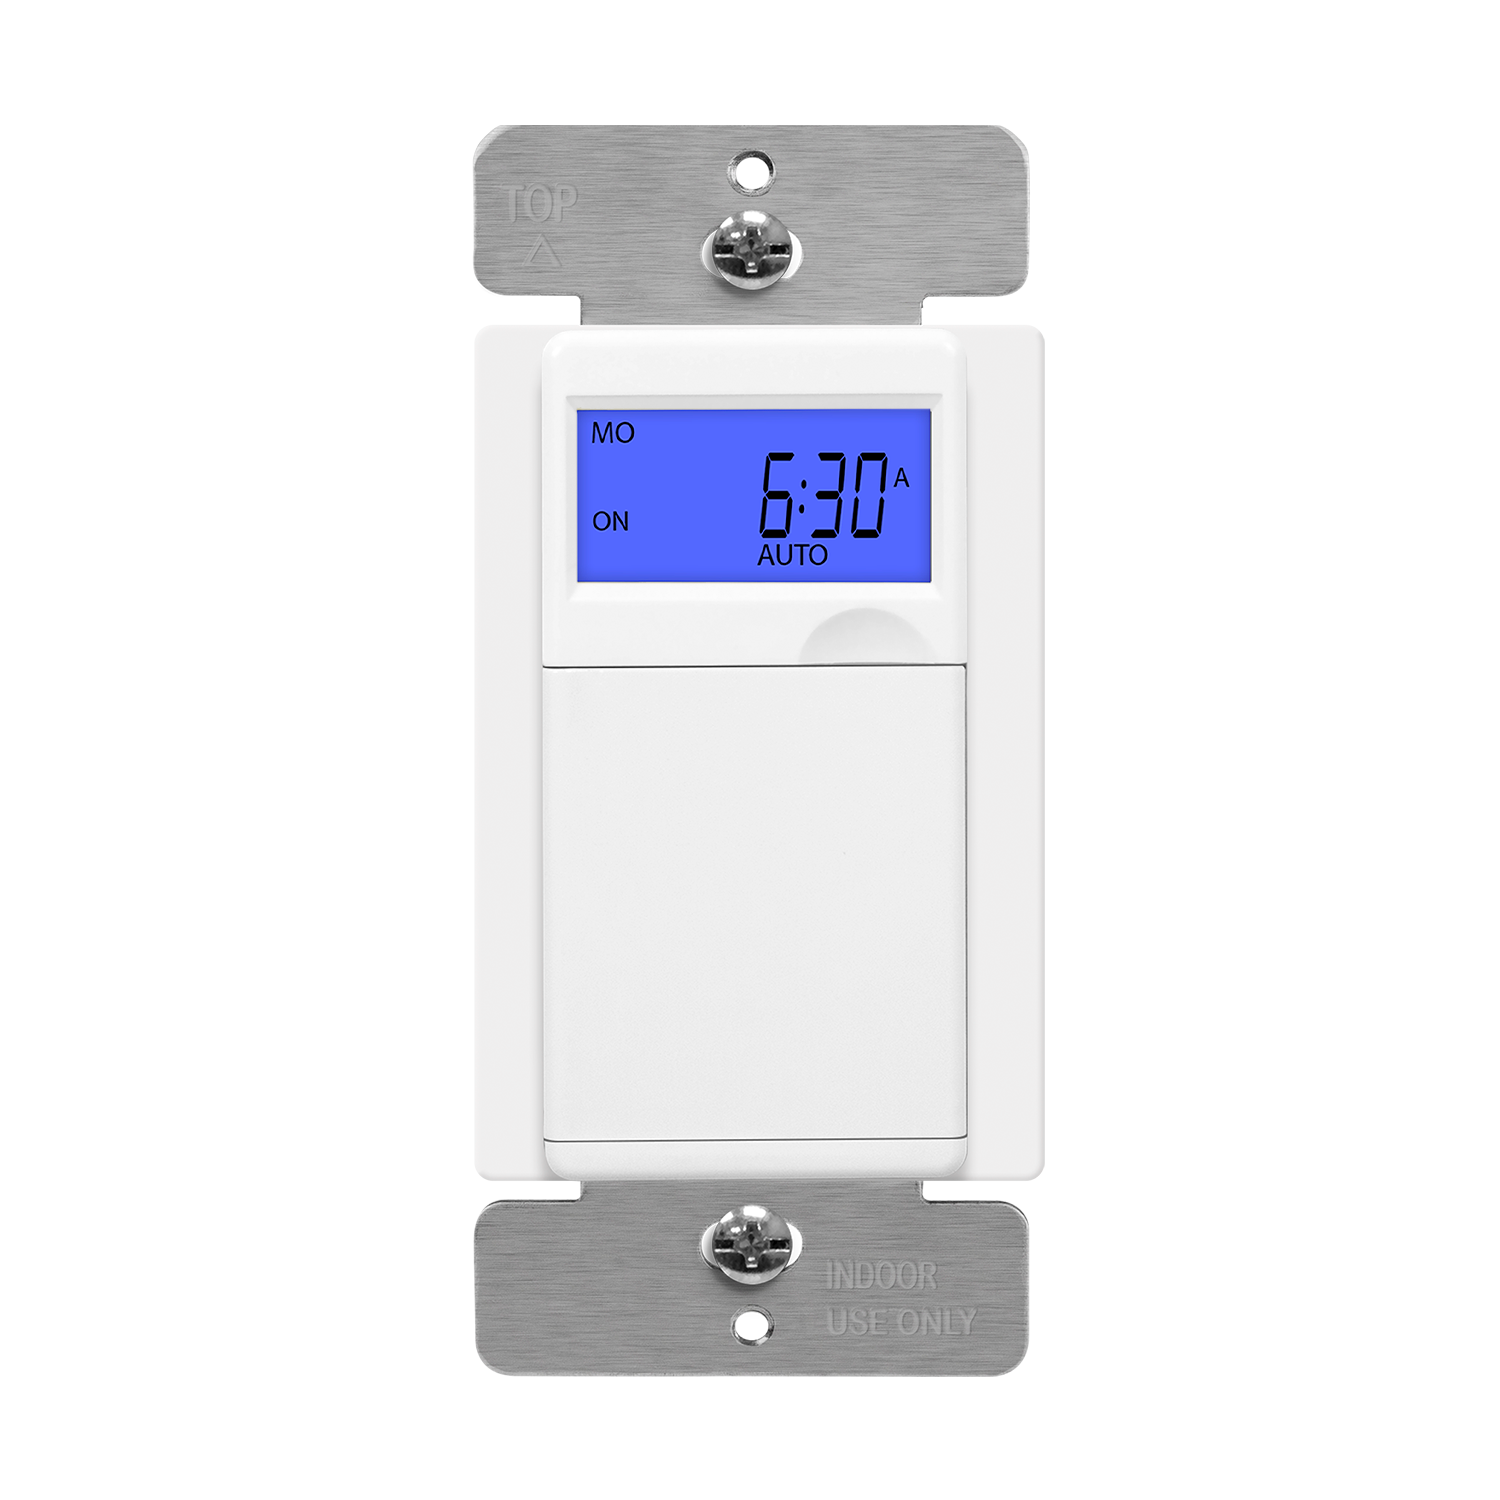 flicker Afsnit meditation 7-Day Digital In-Wall Programmable Timer Switch